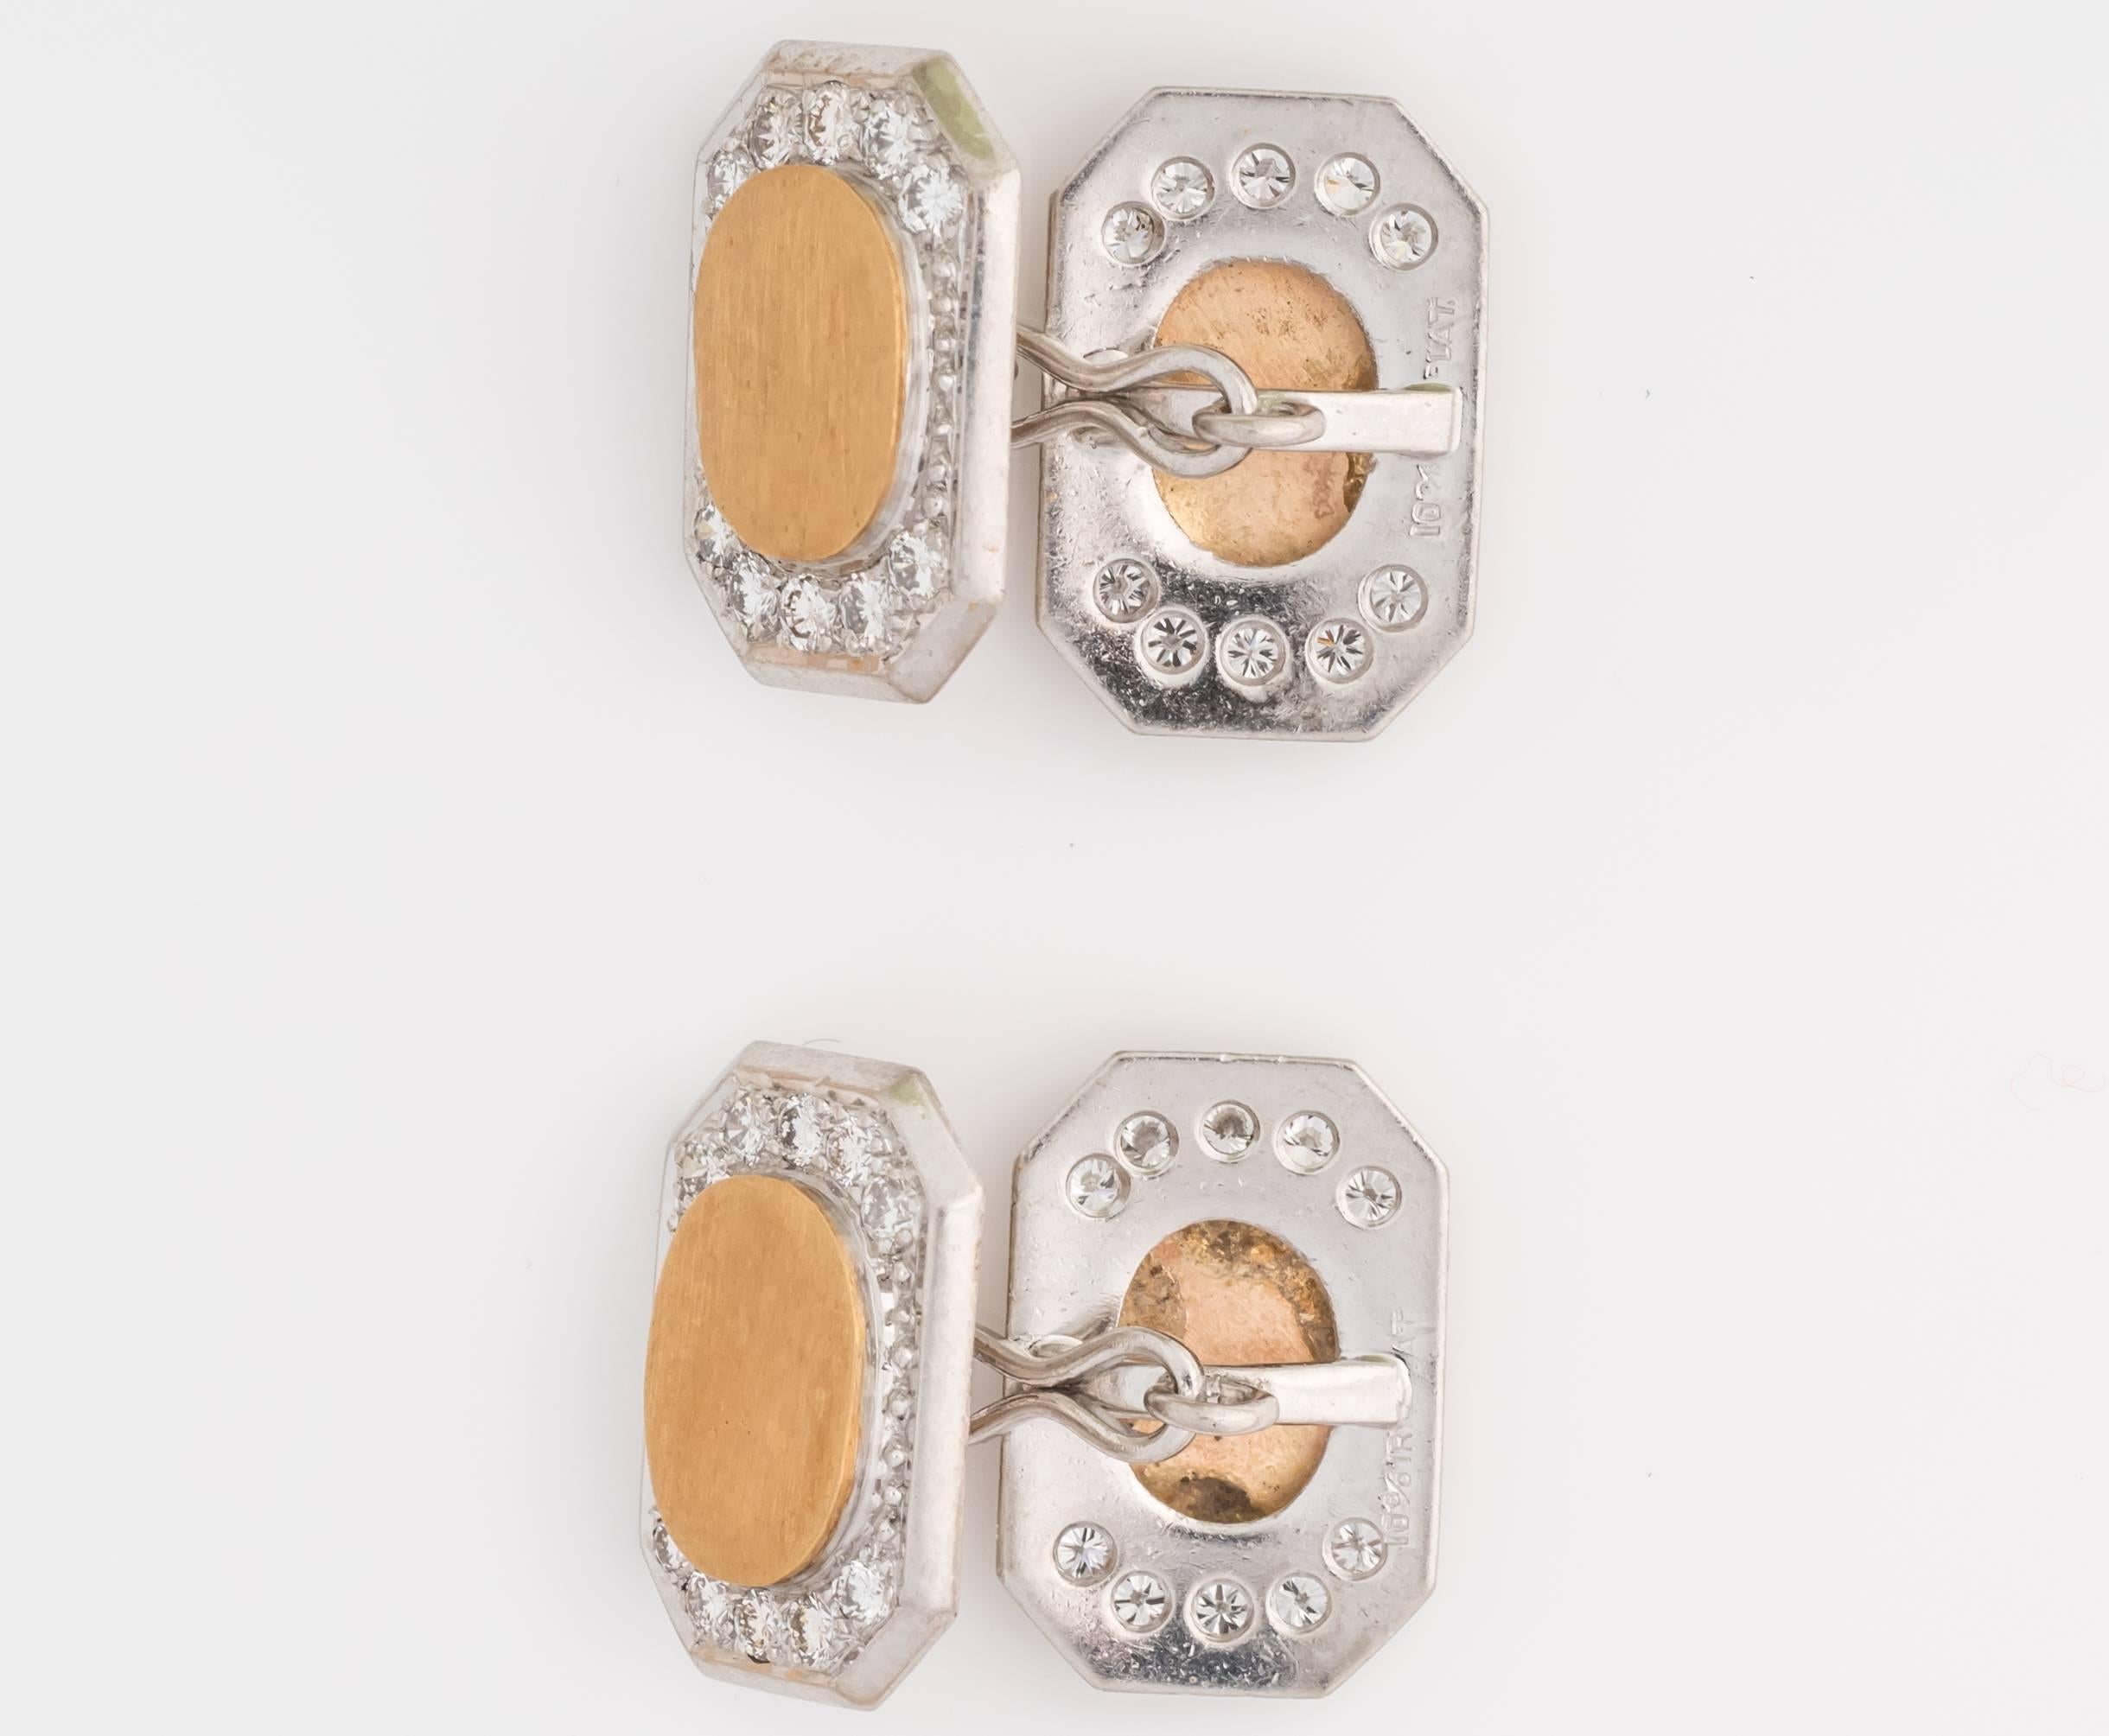 Unique pair of cufflinks with diamonds crafted in 18kt yellow gold and platinum. These are cufflinks belonging to circa 1950s. All diamonds are F color and VVS in clarity. Total carat weight of diamonds is 2.10cts and all diamonds are round